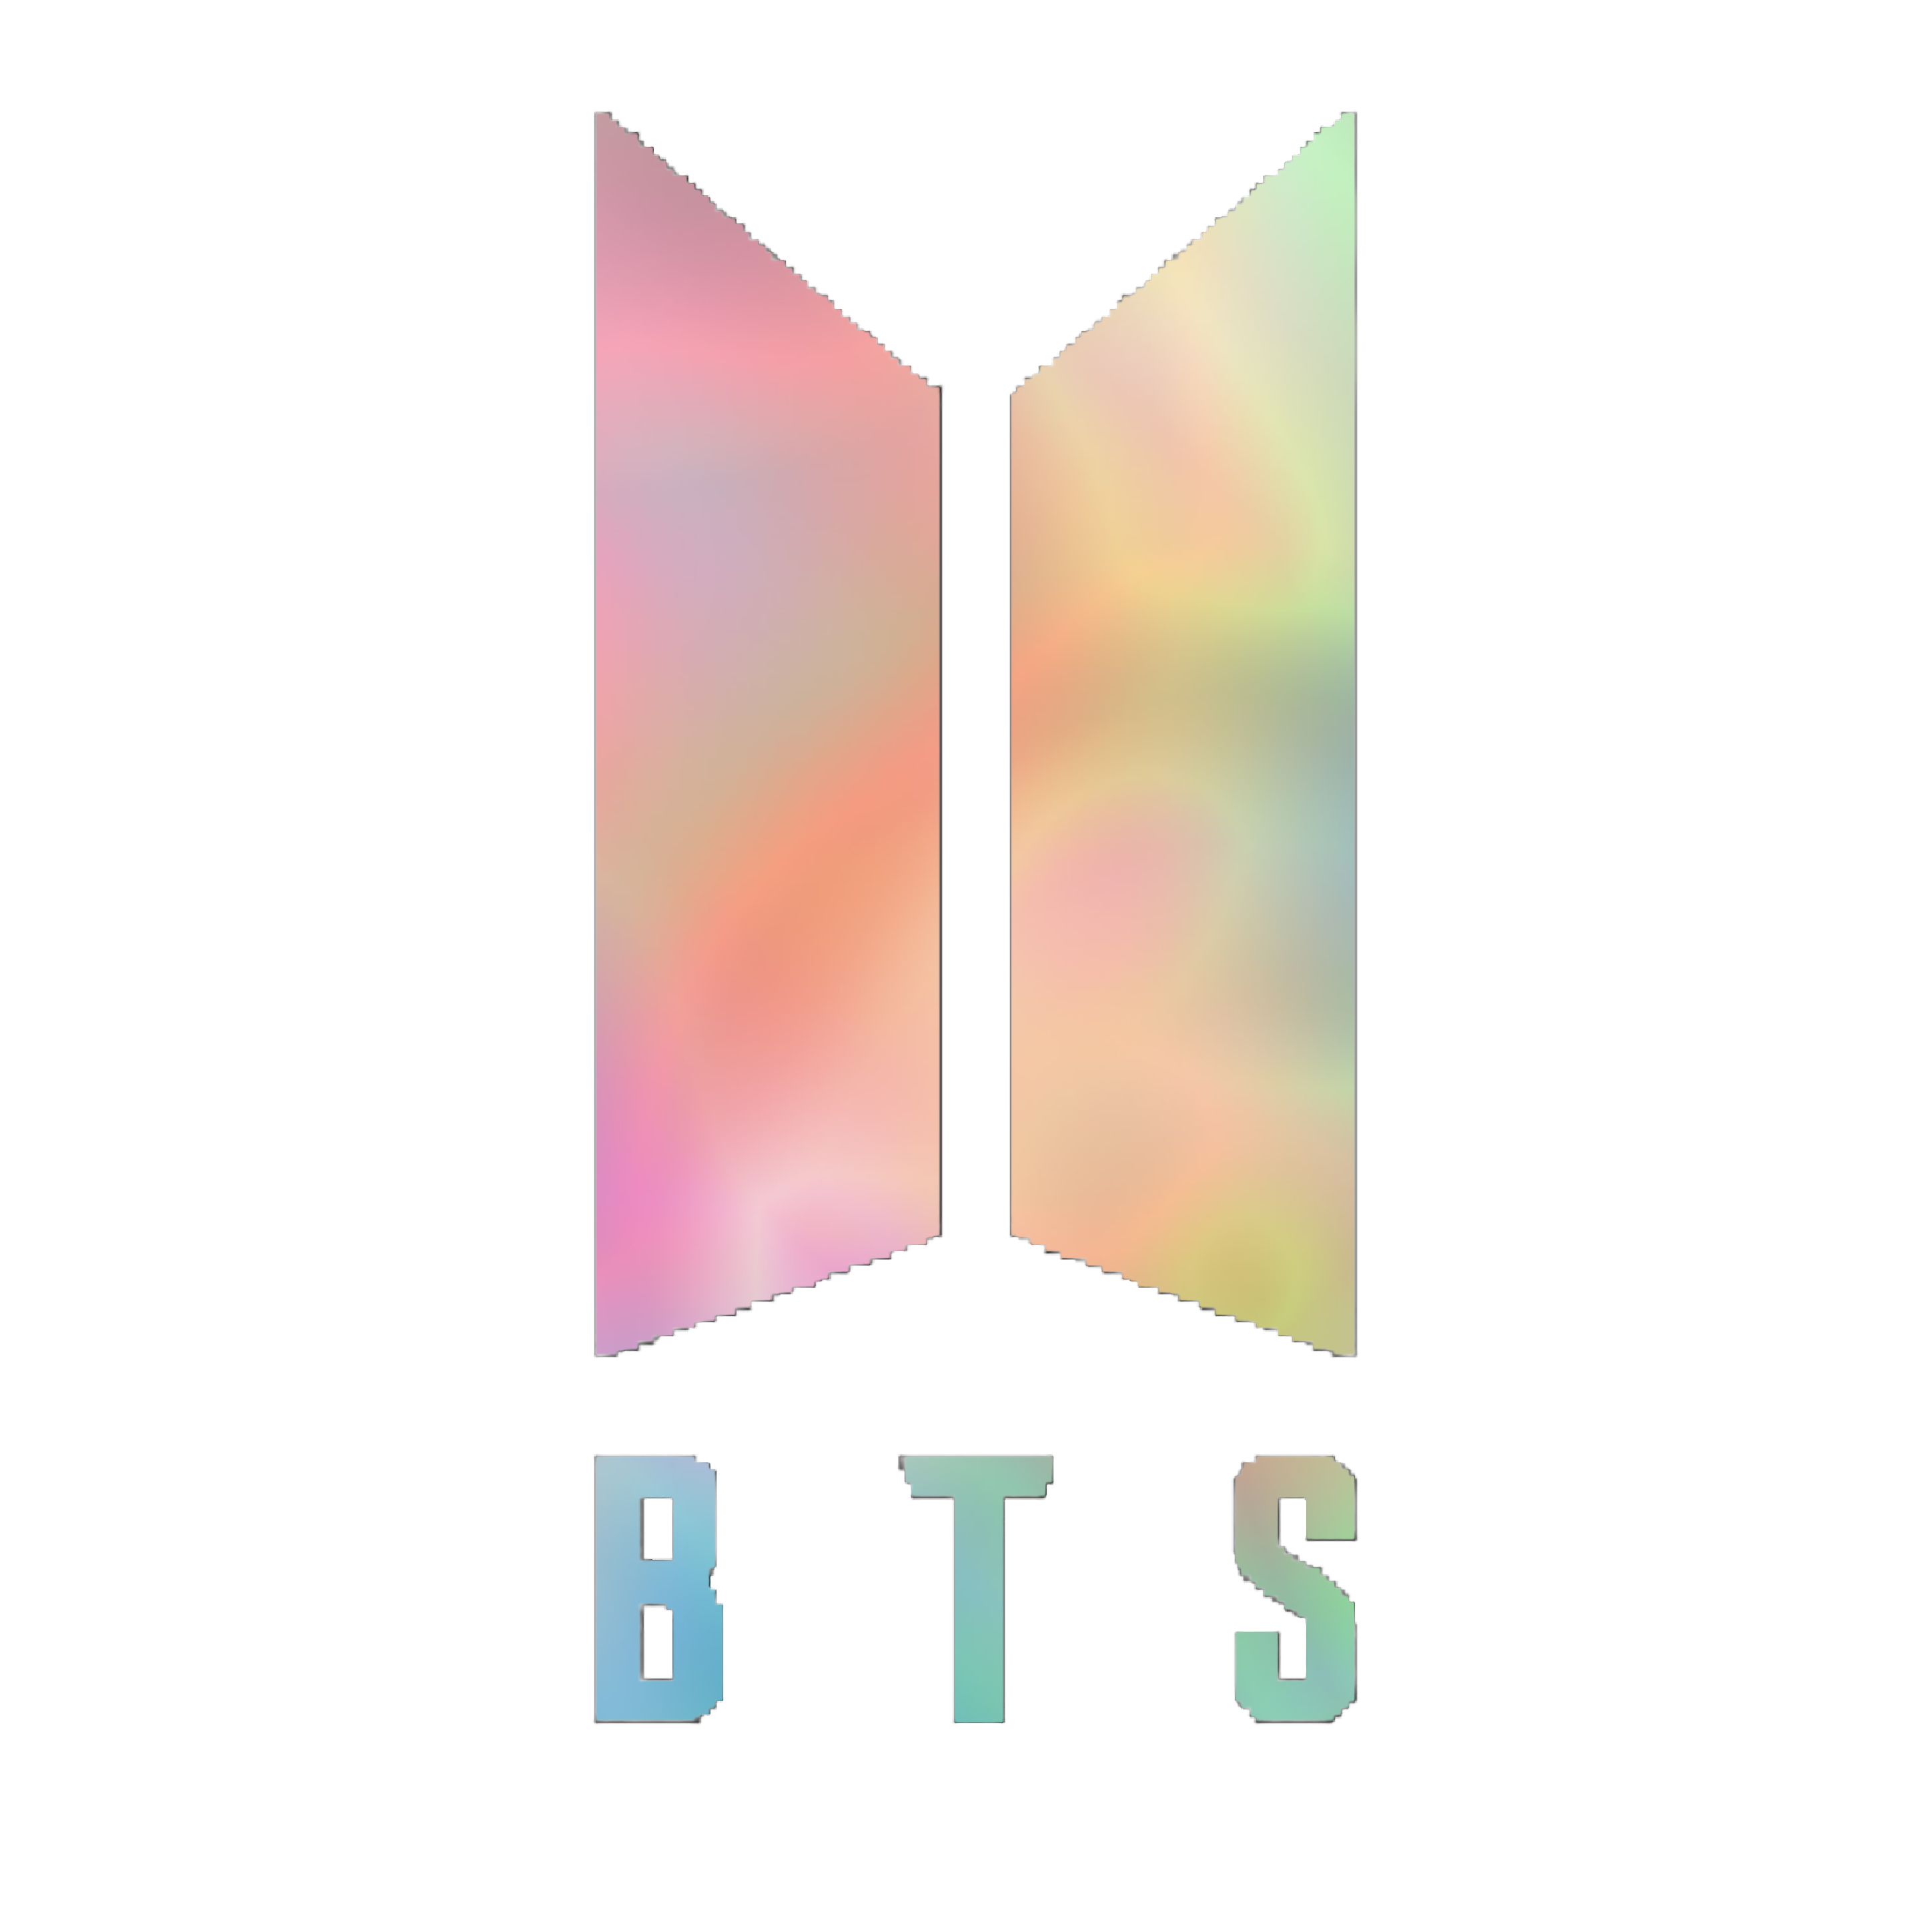 Bts Logo Png White : Bts Wings Logo Png by TharindouKpop123 on ...